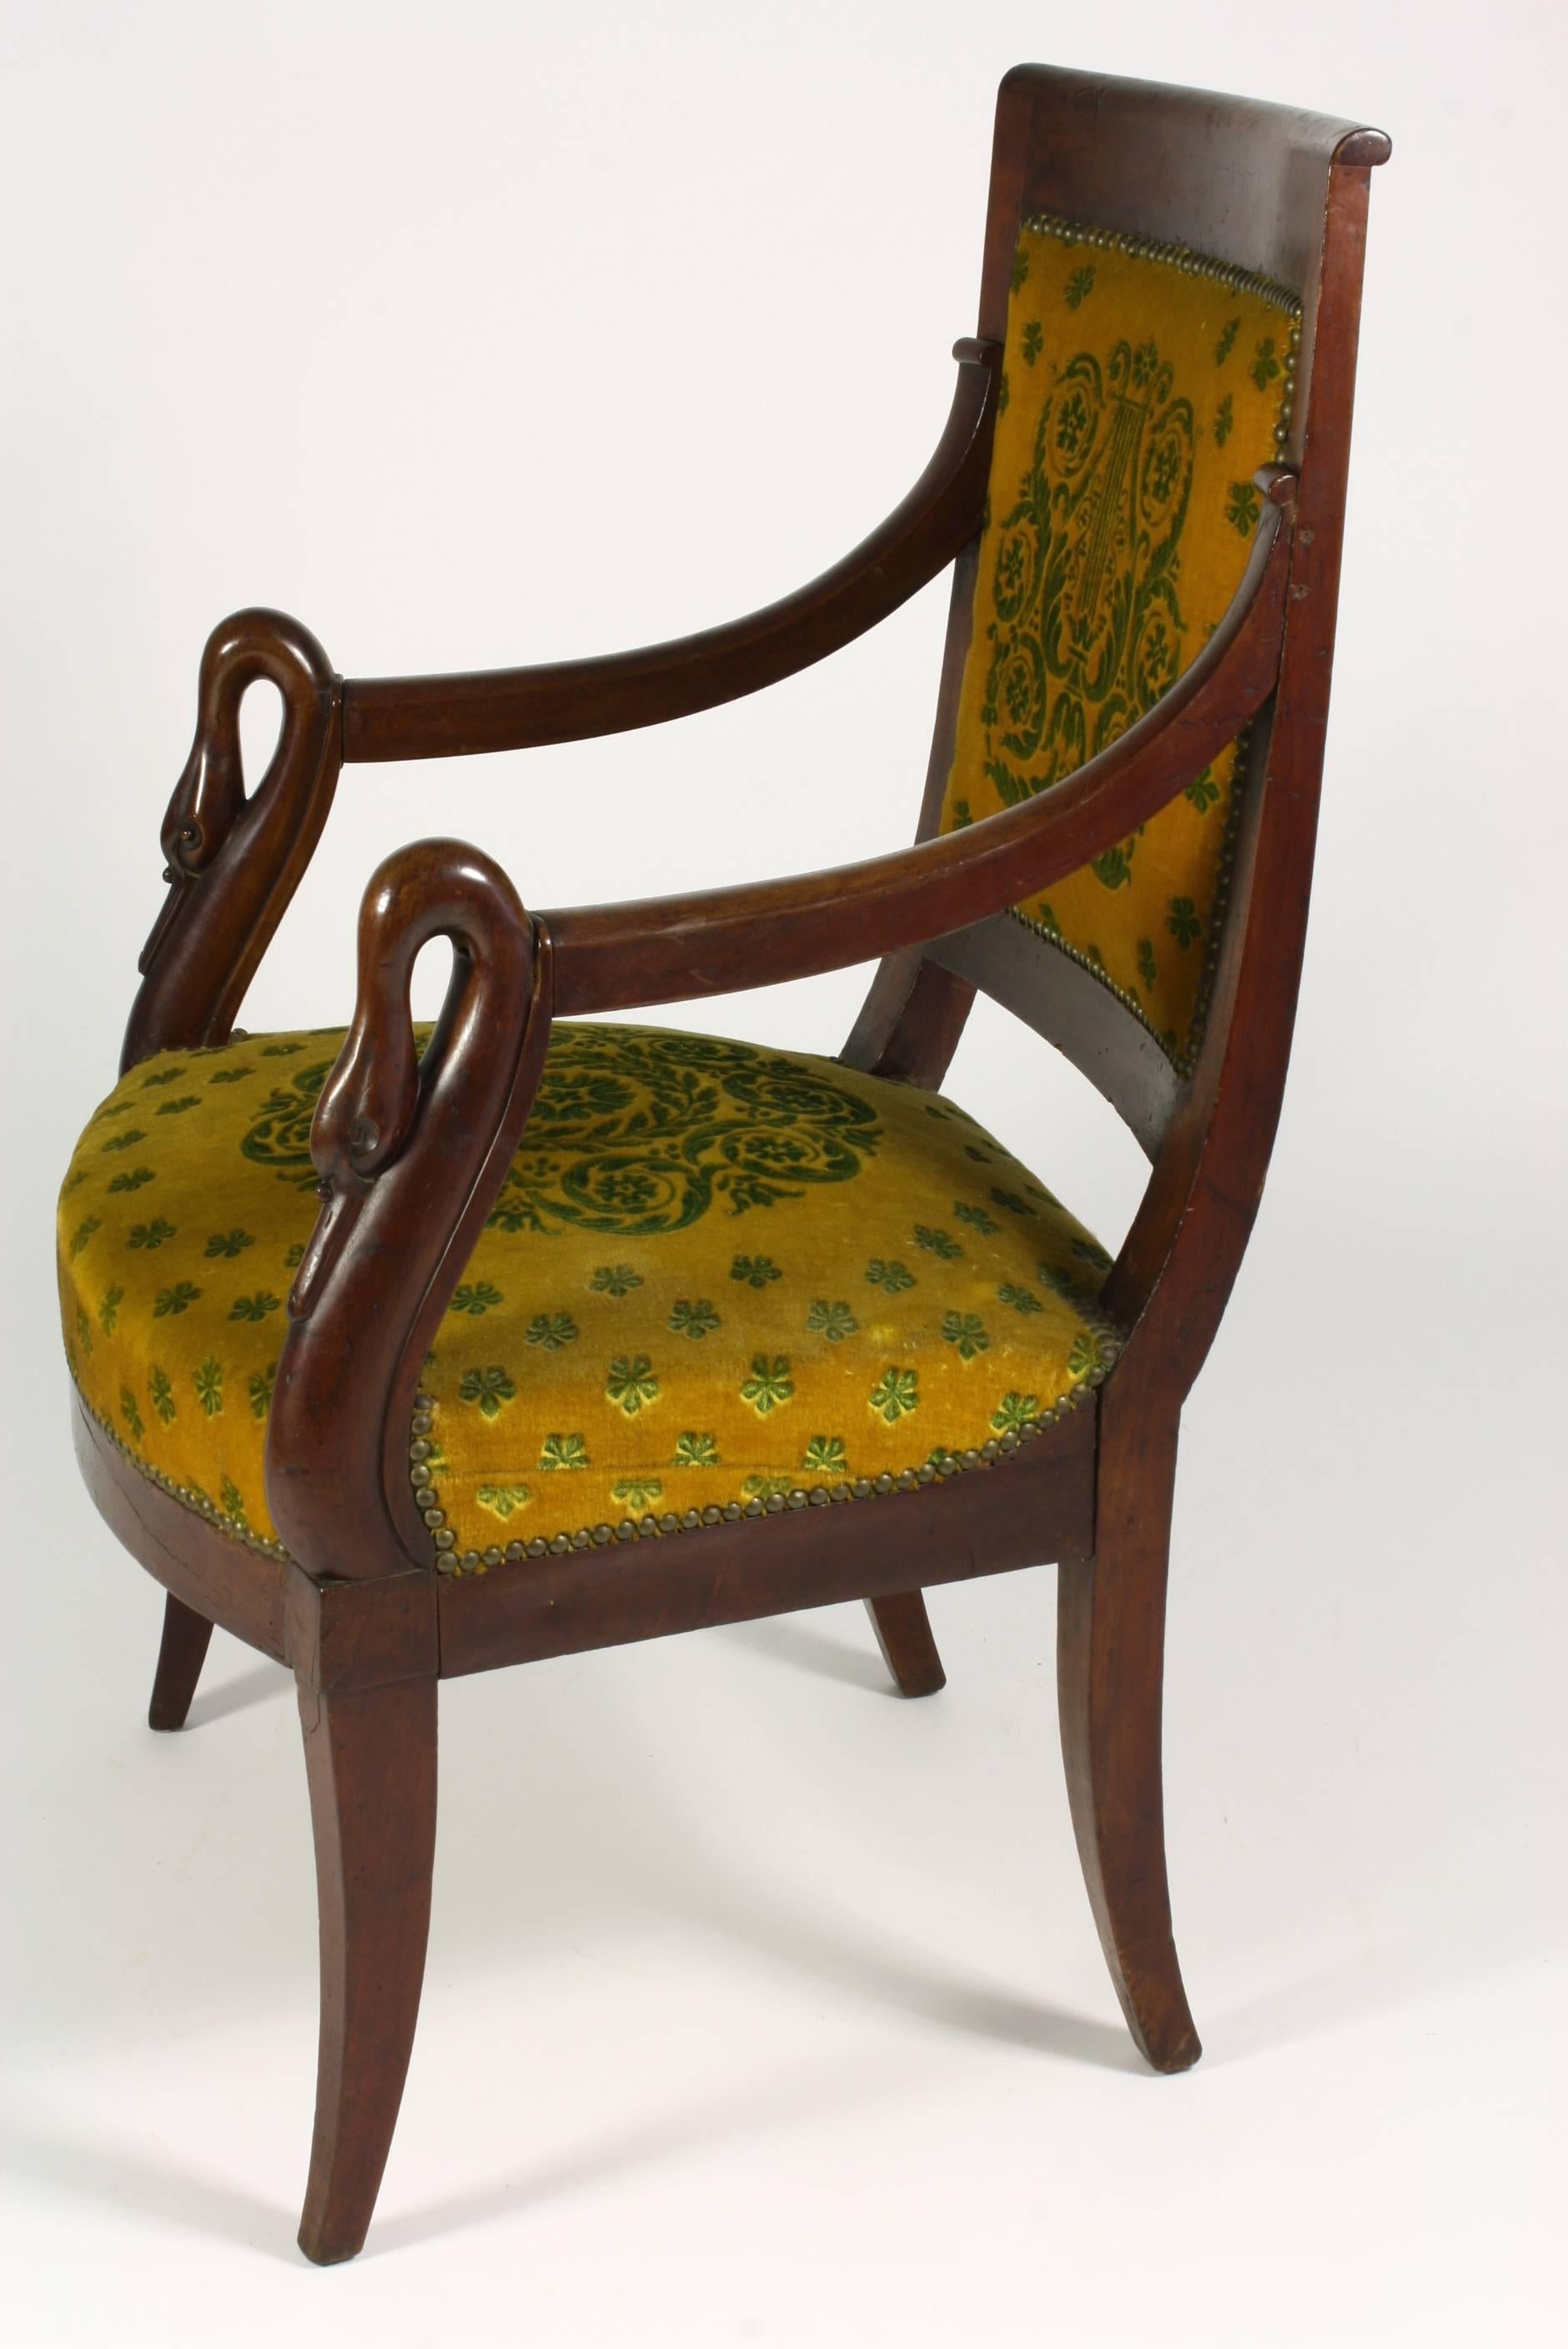 French Empire period mahogany fauteuil or armchair with saber legs and swans' heads on the arms.  The chair is upholstered neoclassical-patterned cut mohair fabric.